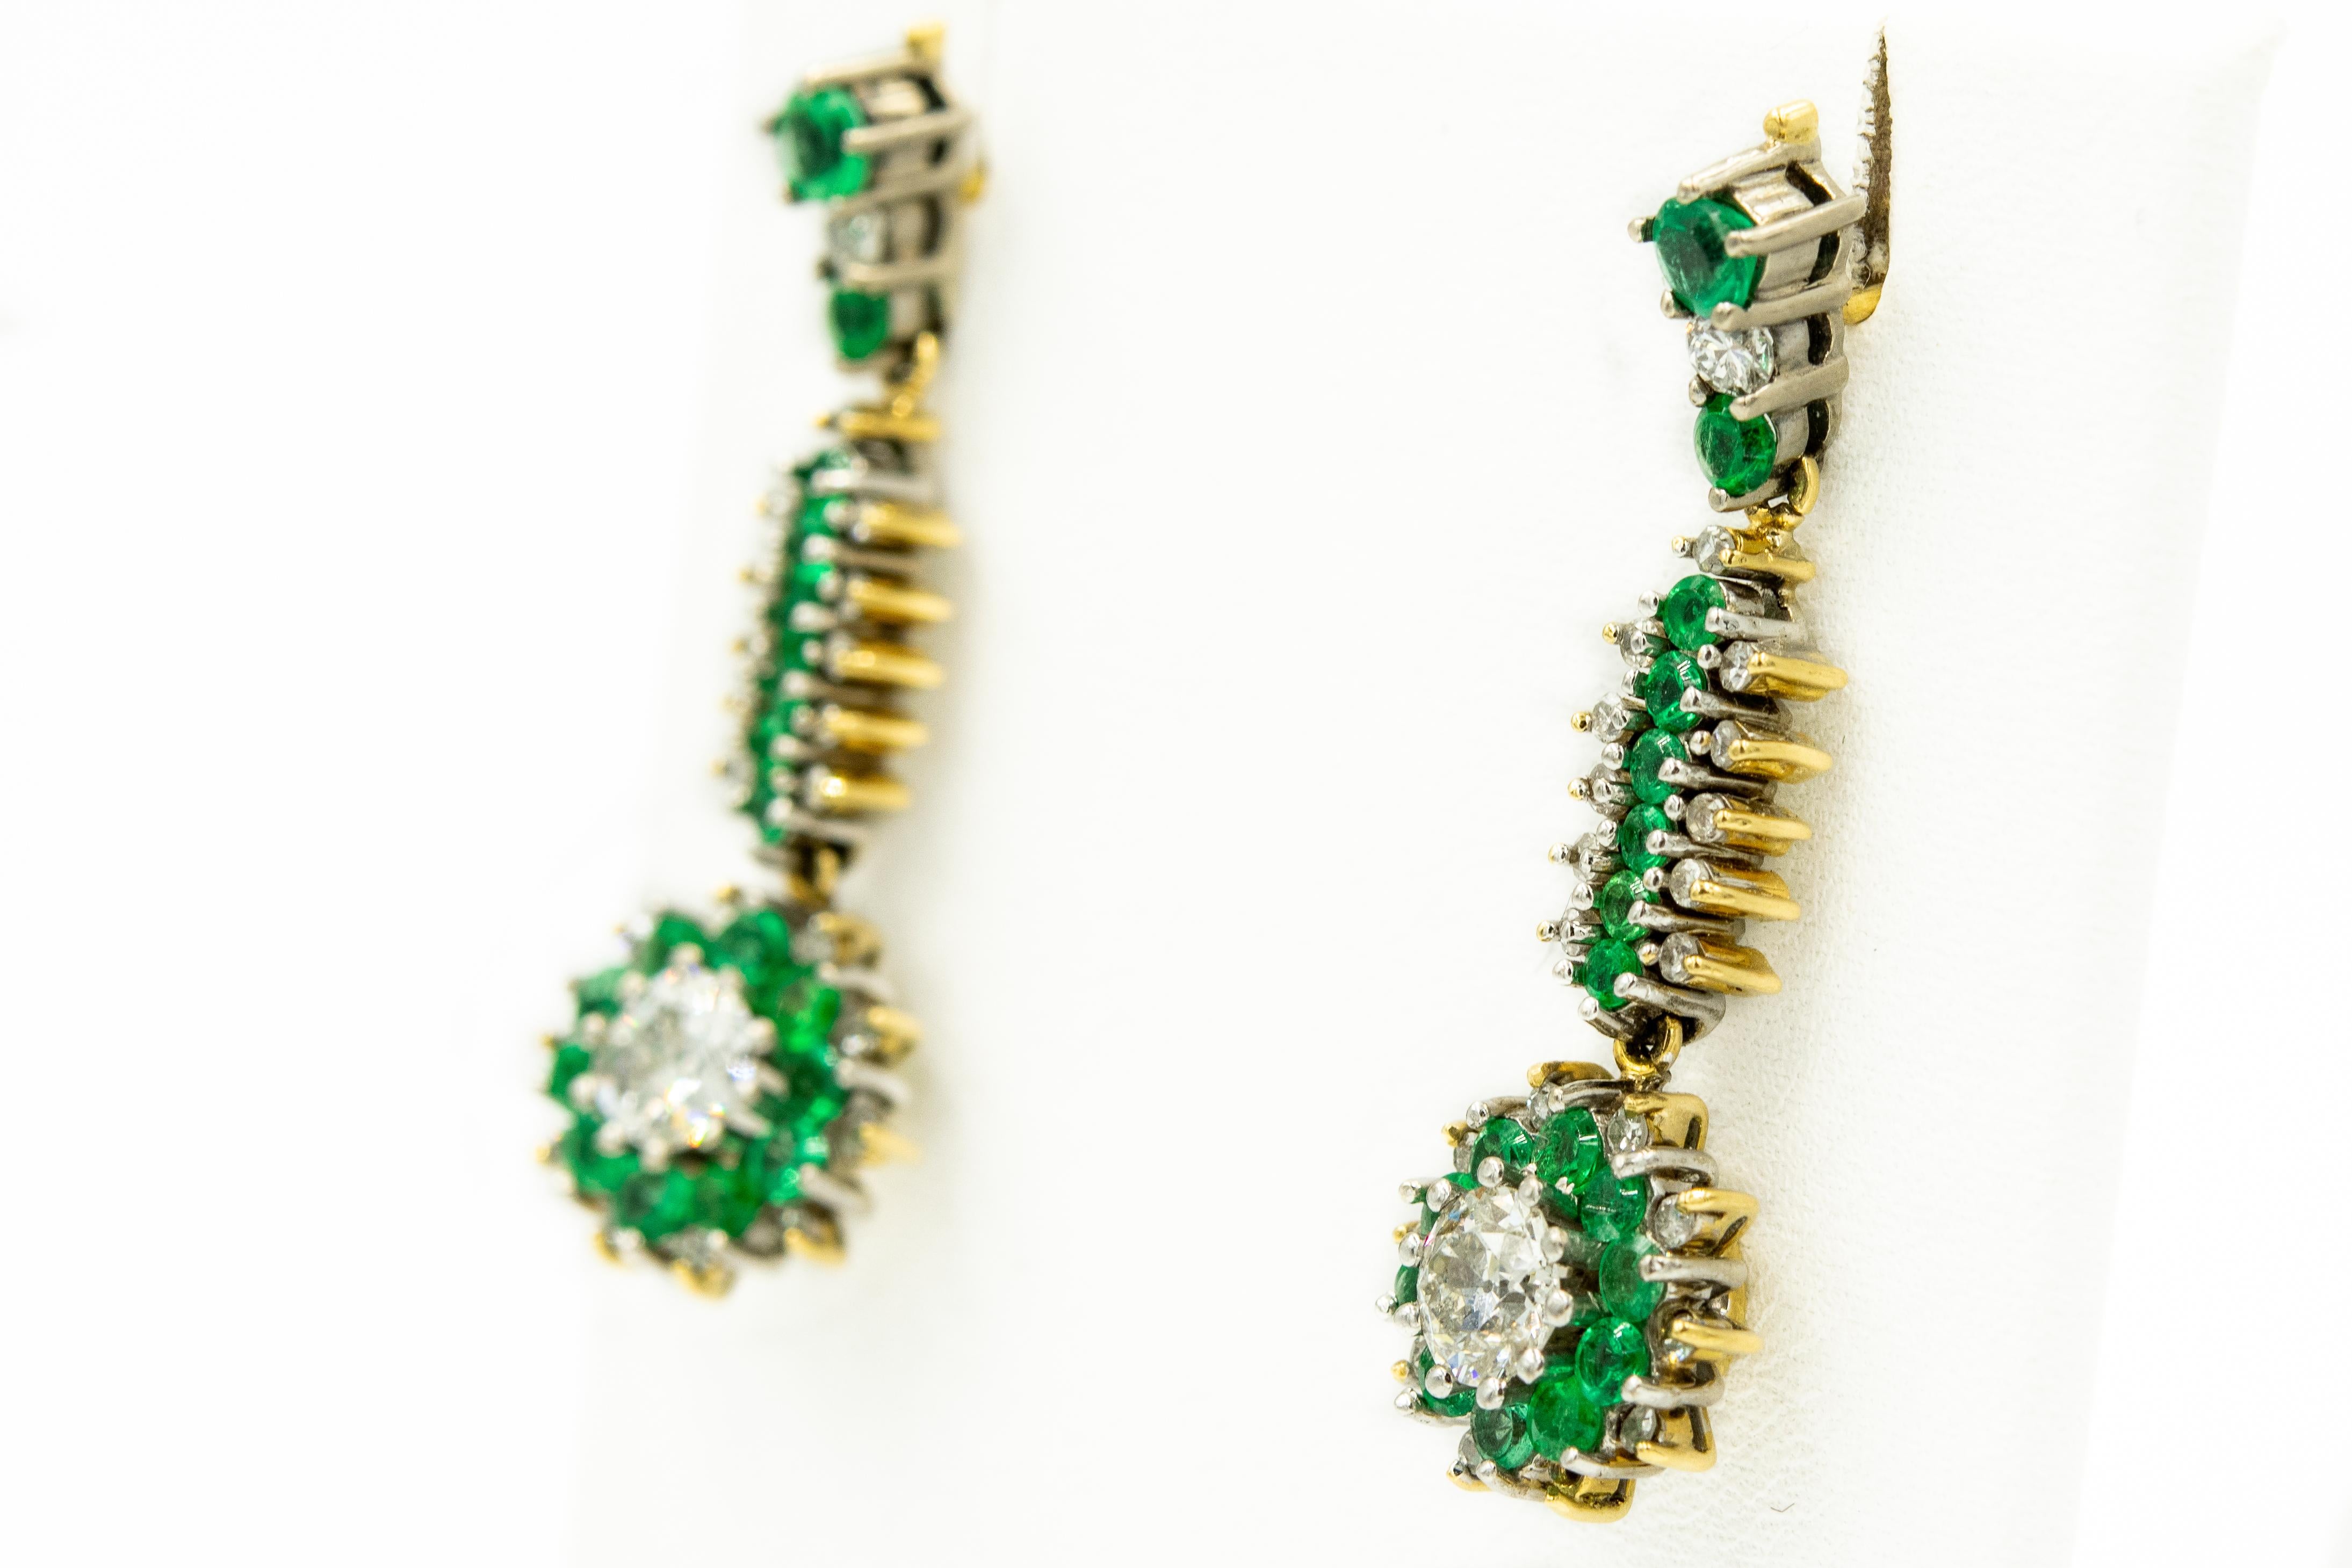 Custom made emerald and diamond earrings featuring a prong set 3 stone emerald and diamond top section leading to another section with emerald center with diamonds on the sides terminating at a pair of .55 carat European cut diamonds set in an